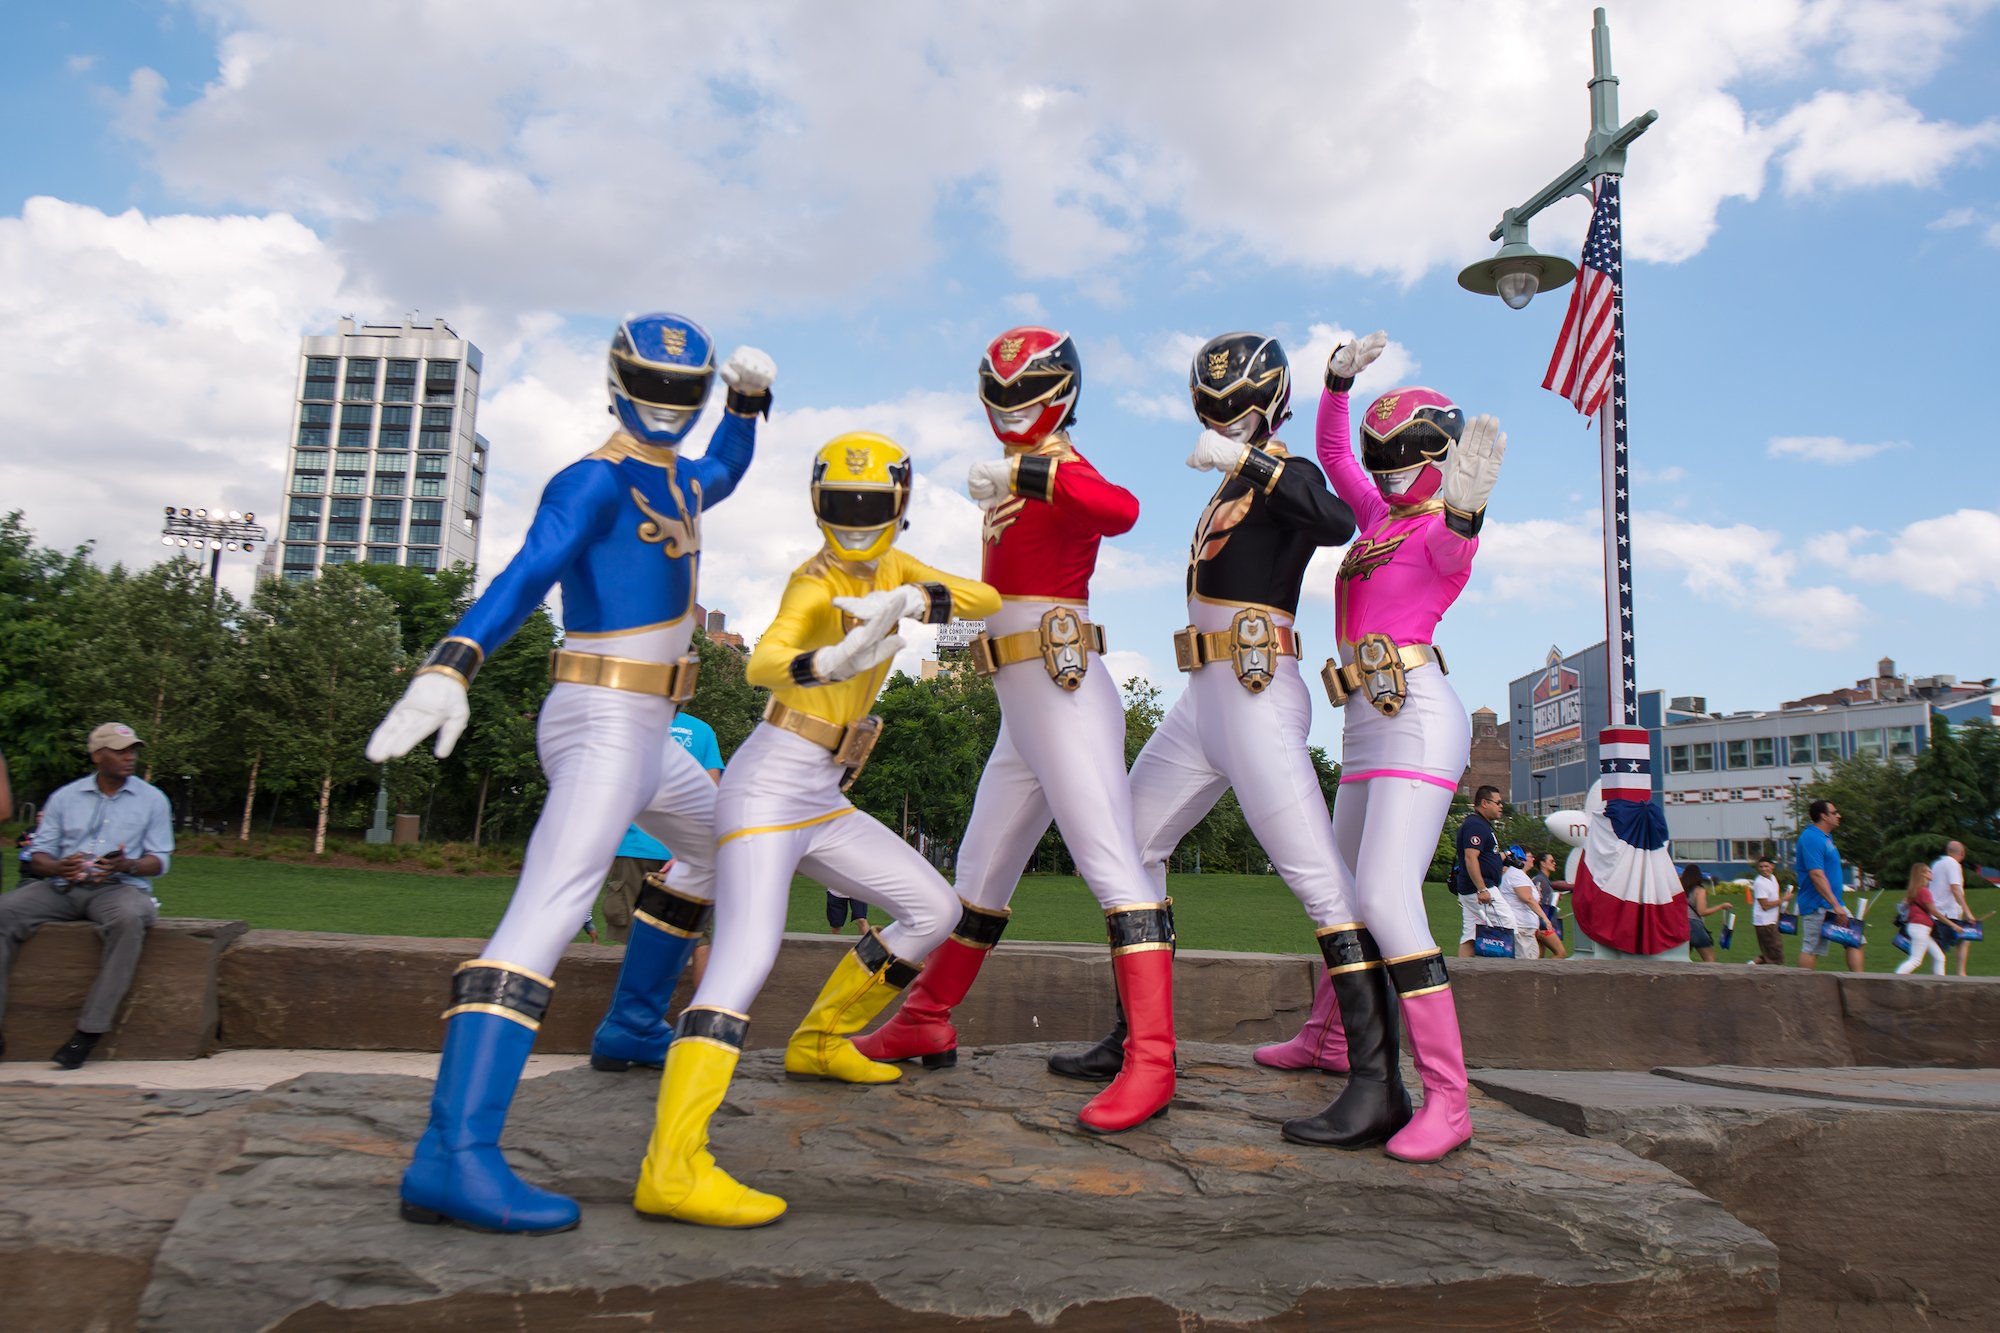 Power Rangers standing in a park